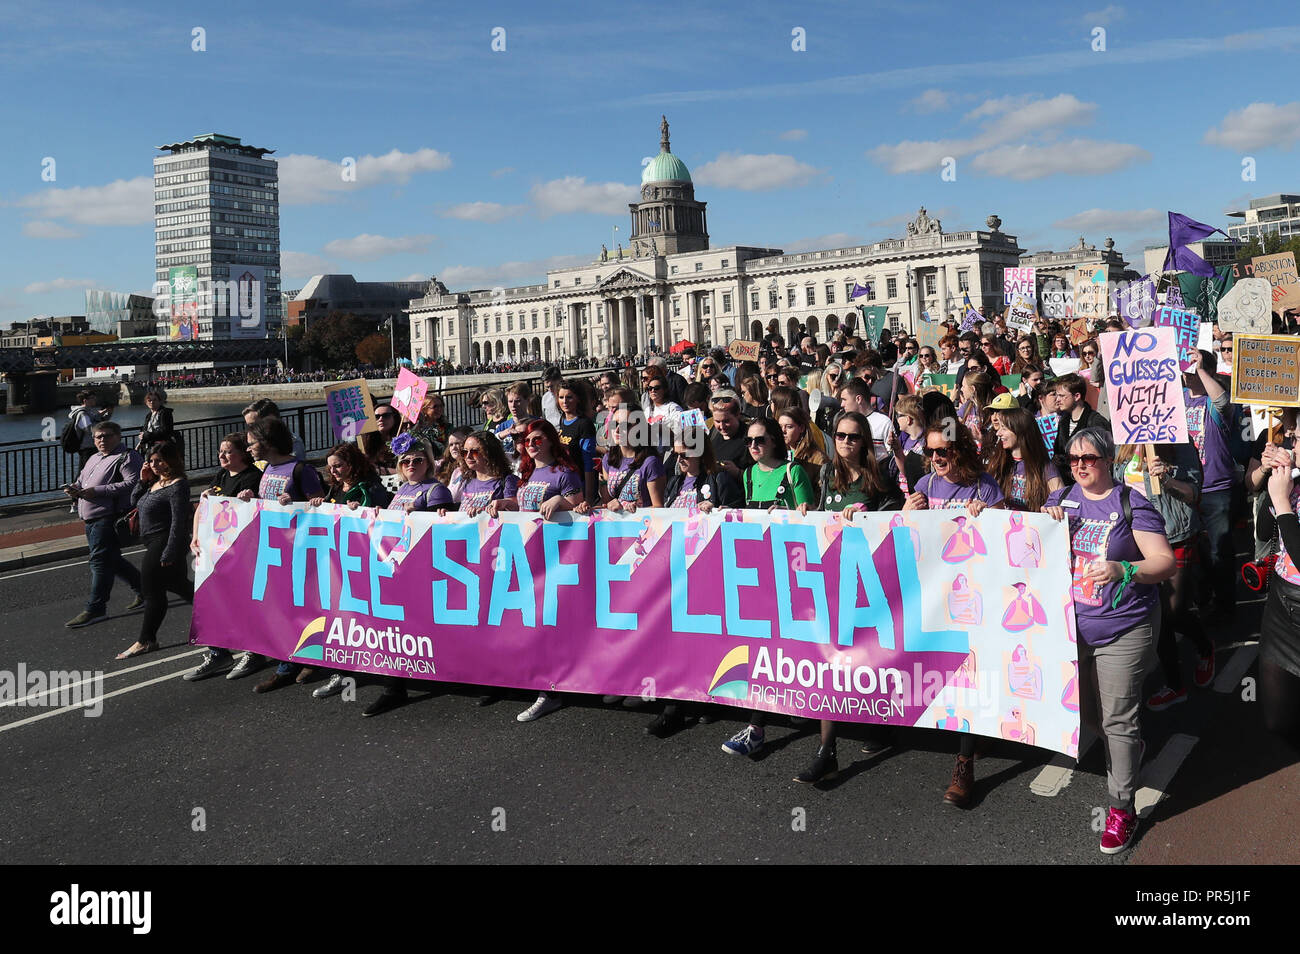 Demonstrators take part in the Abortion Rights Campaign's annual March for Choice In Dublin, as legislation to liberalise Ireland's termination laws is set to be introduced into the Dail next week. Stock Photo